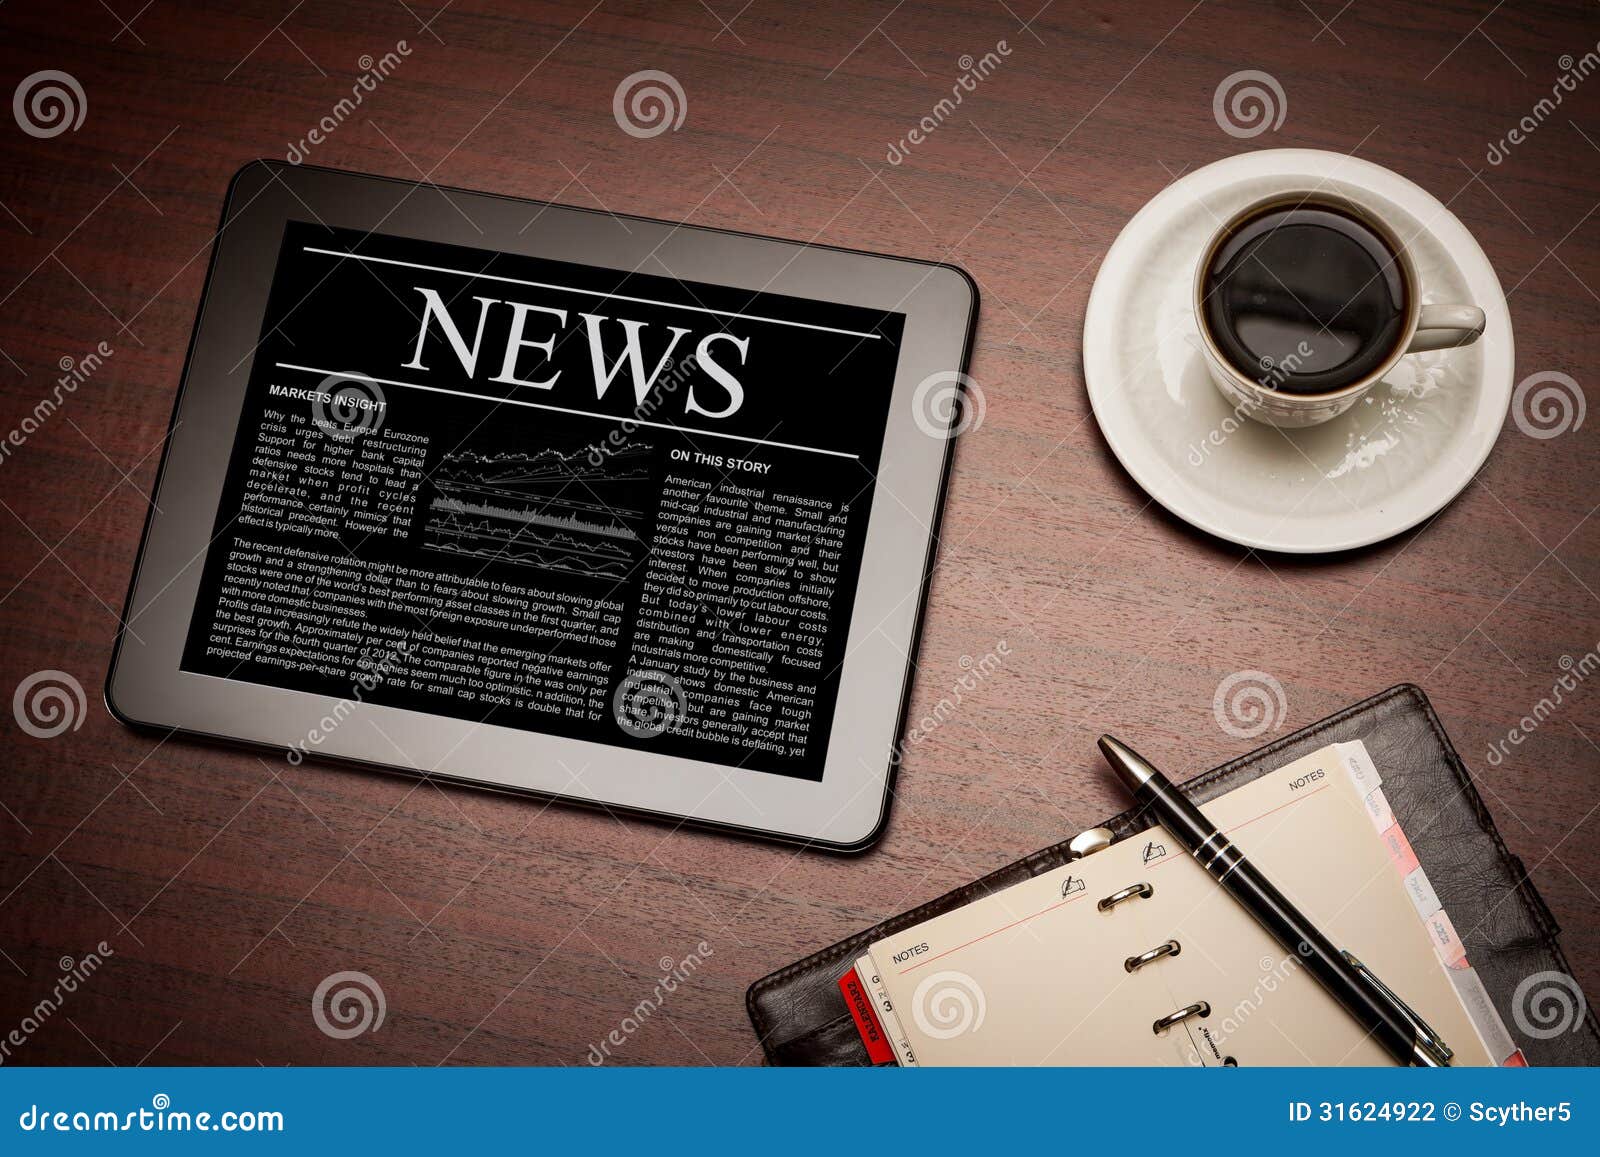 business news on tablet pc.